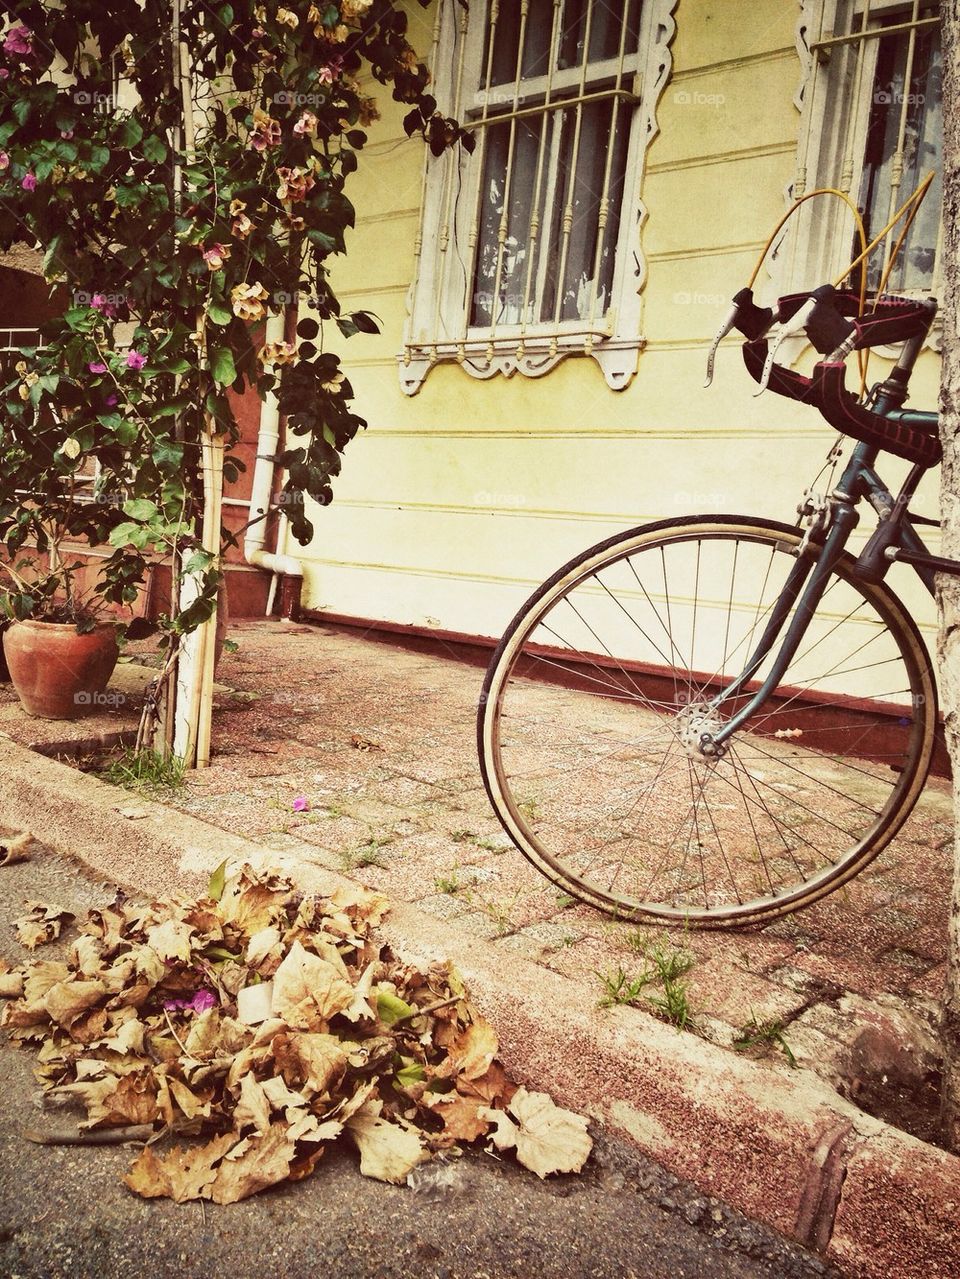 Autumn and Bicycle